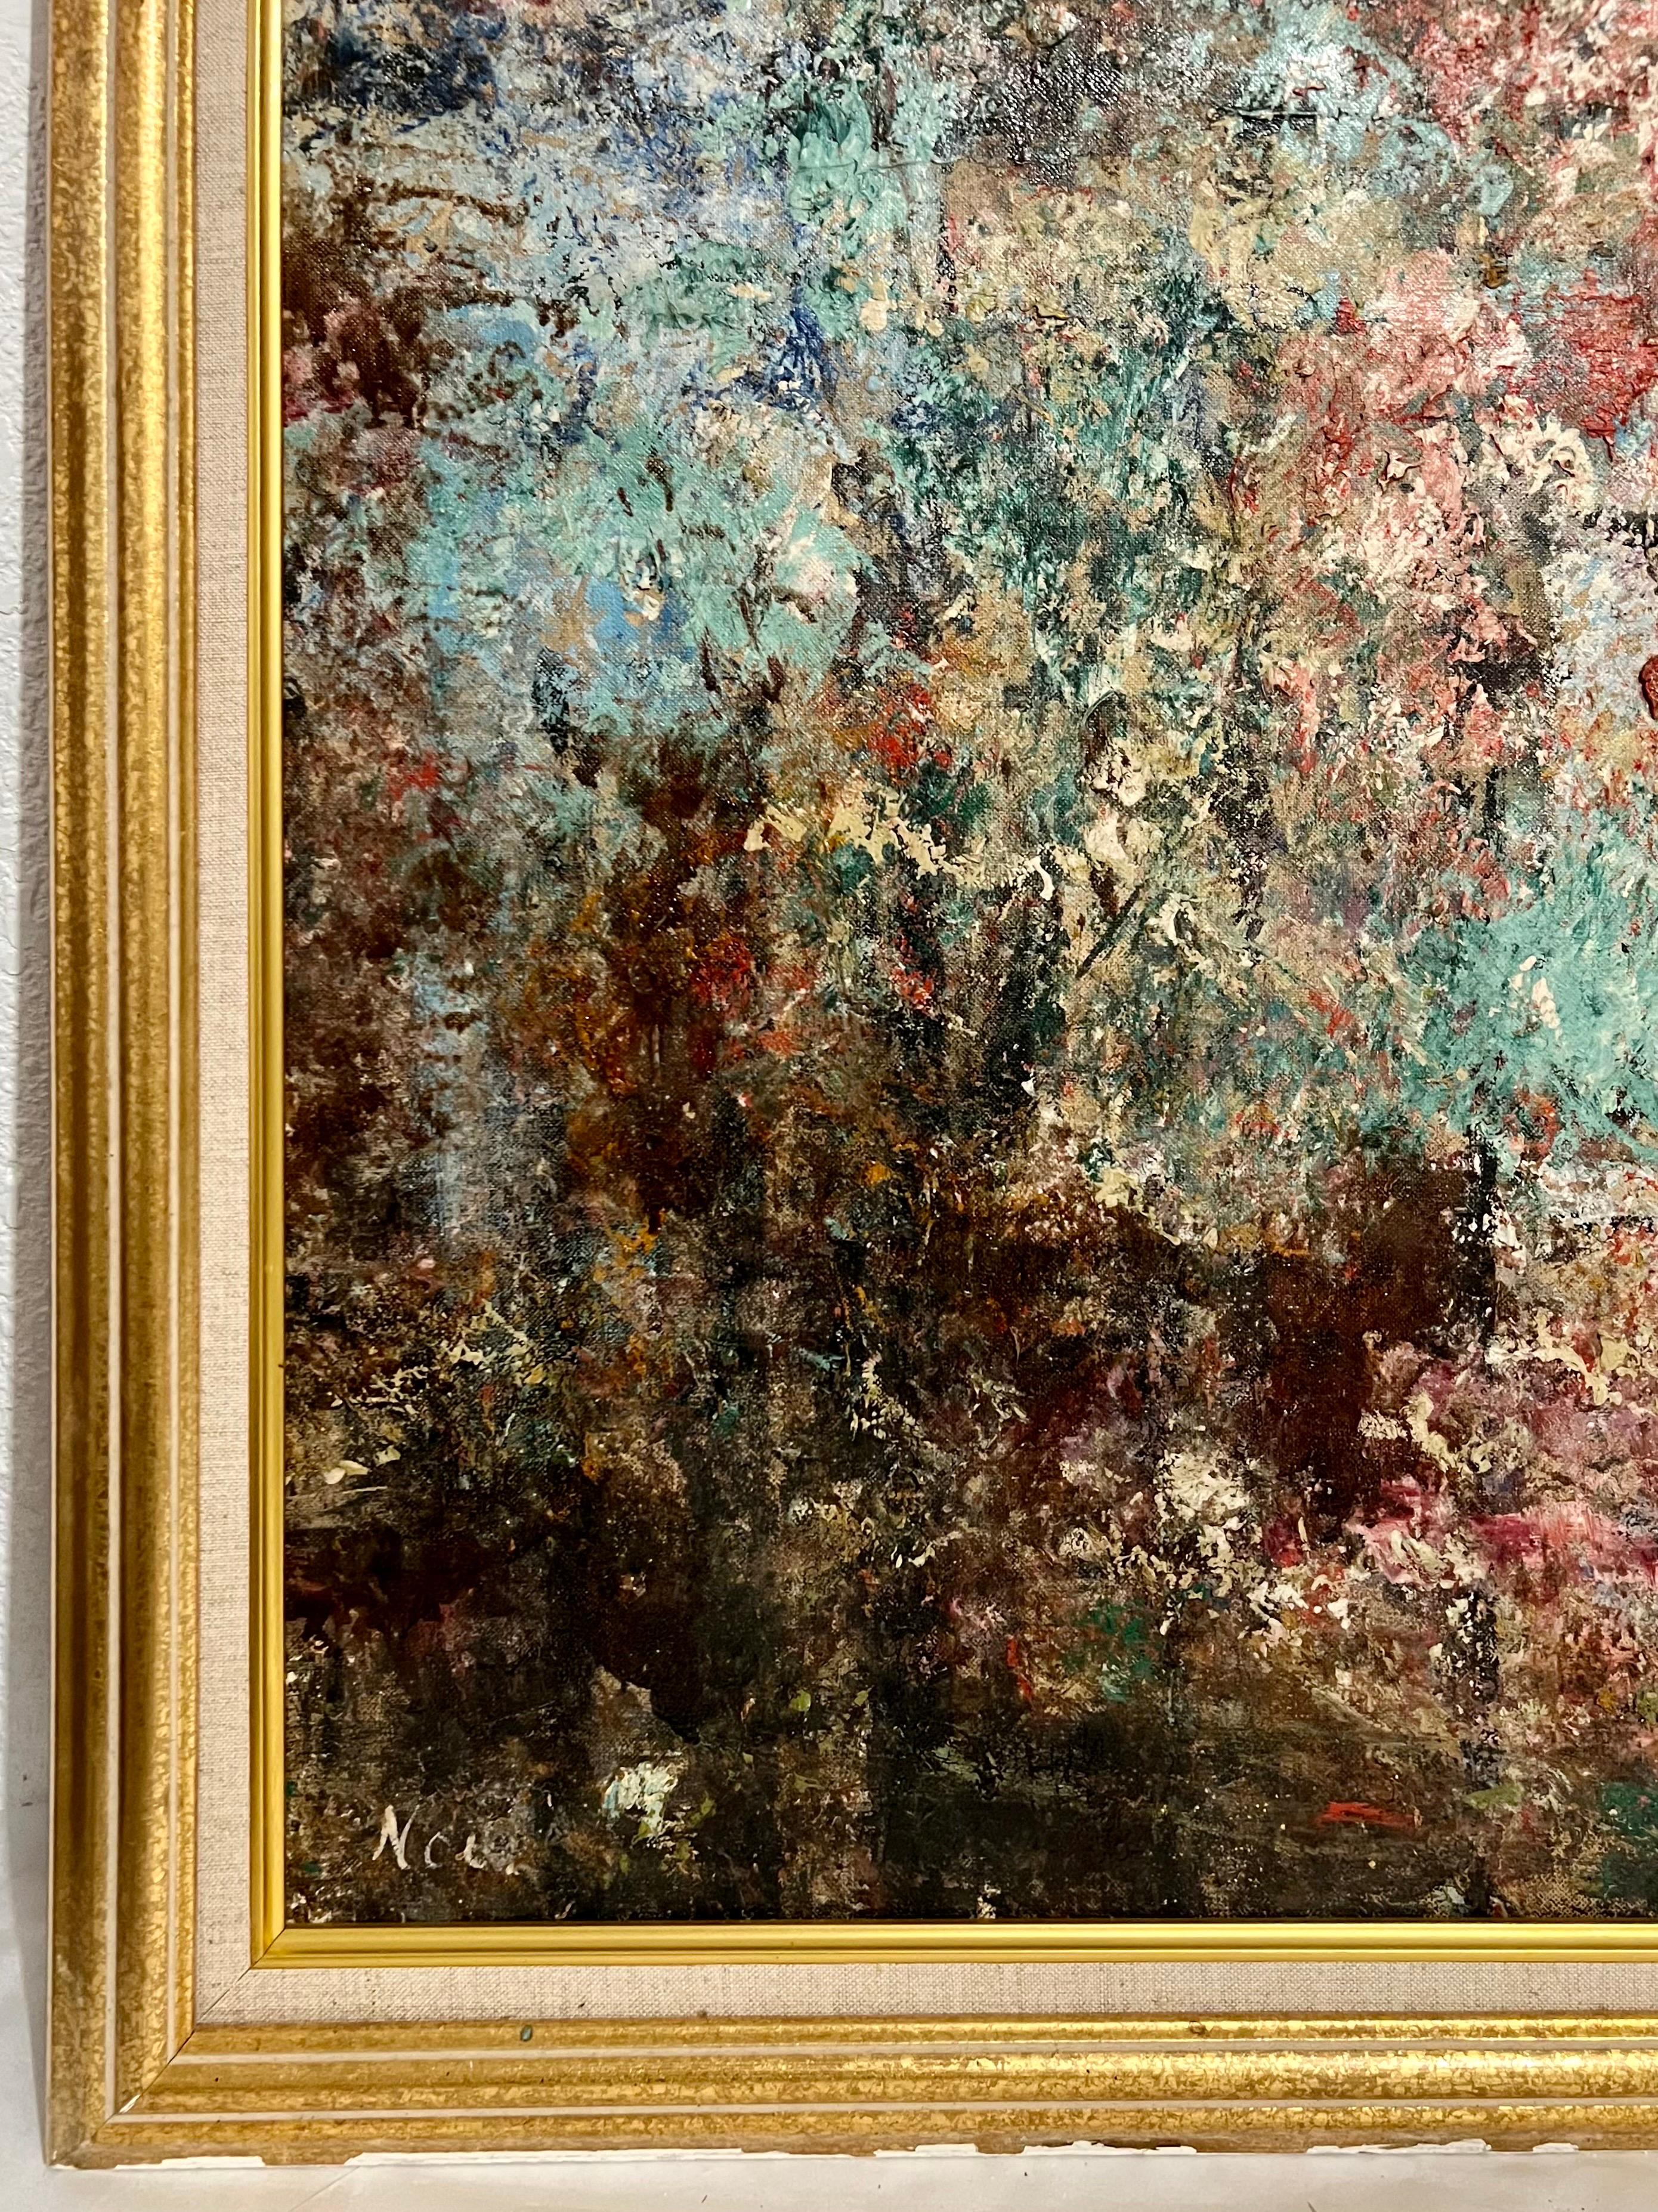  Abstract Expressionist Textured Art Informel Oil Painting Signed Noel For Sale 6